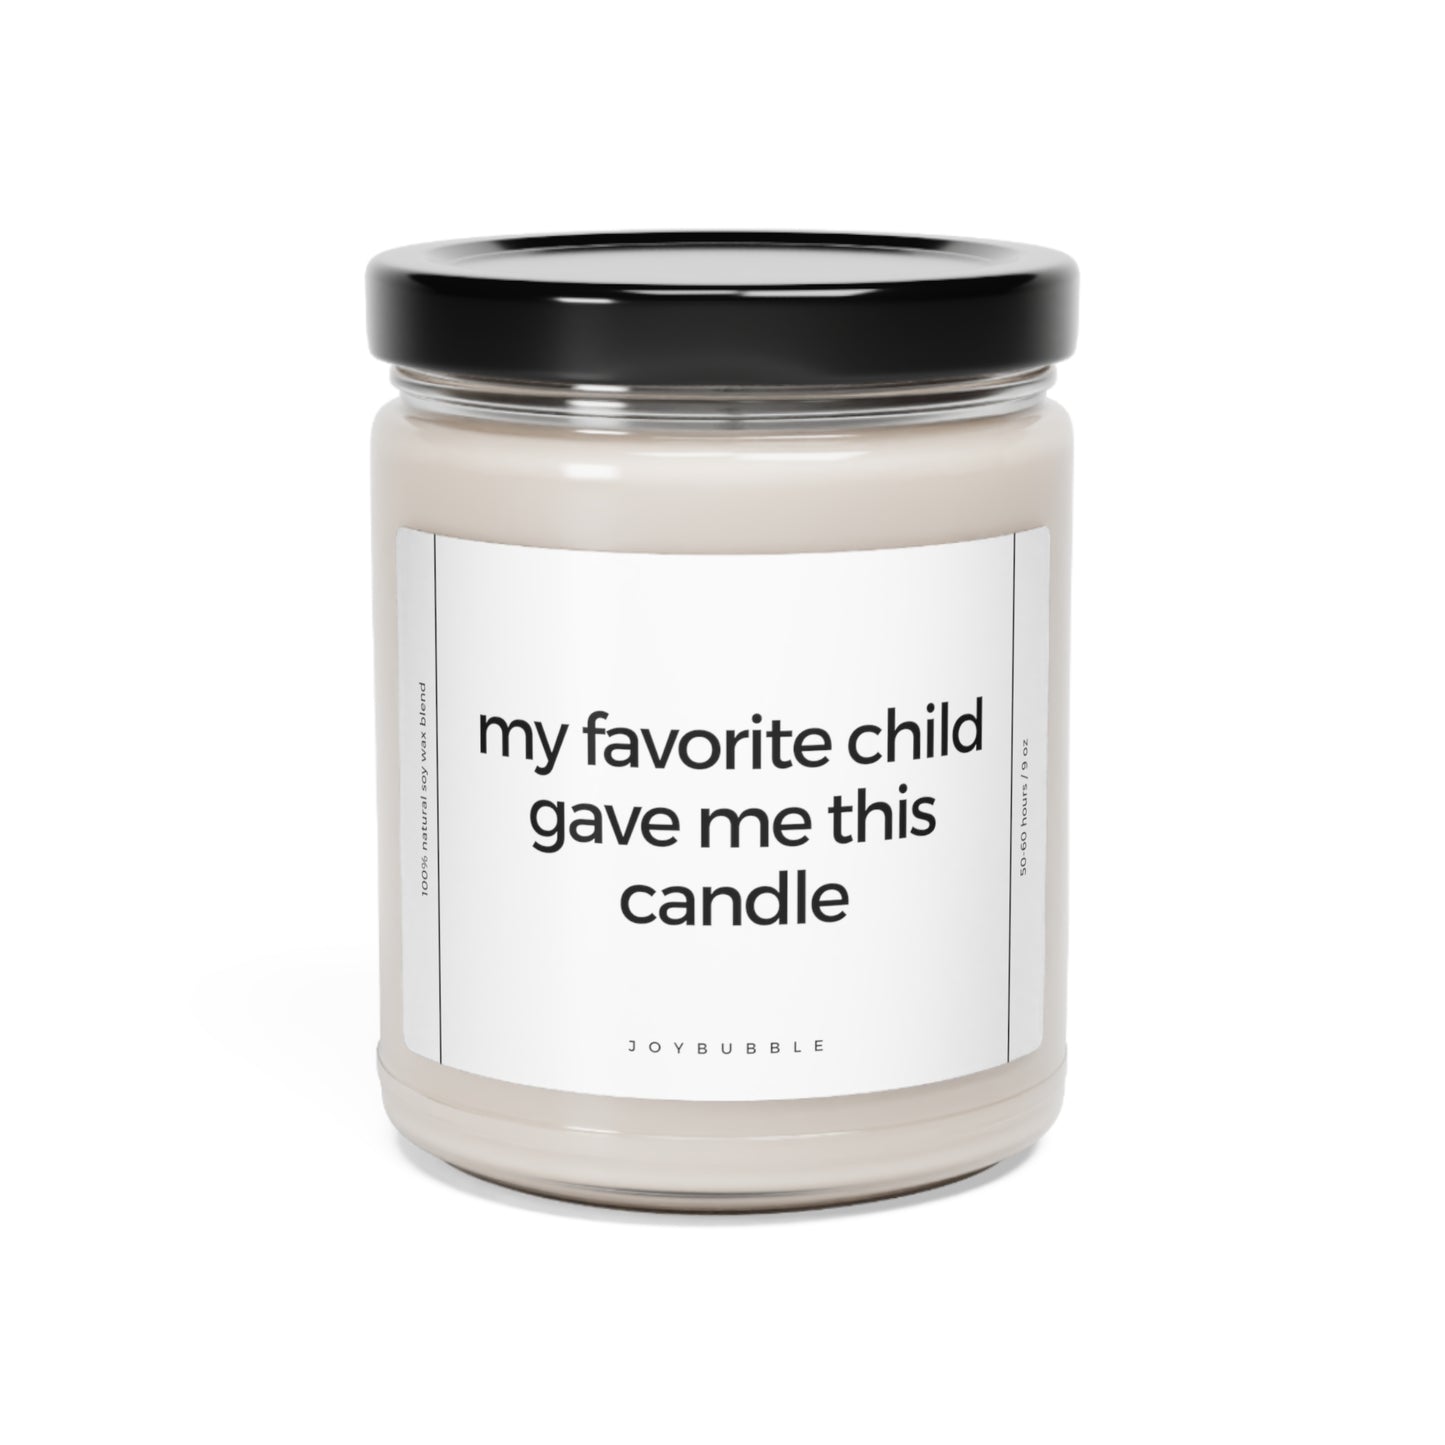 my favorite child gave me this candle